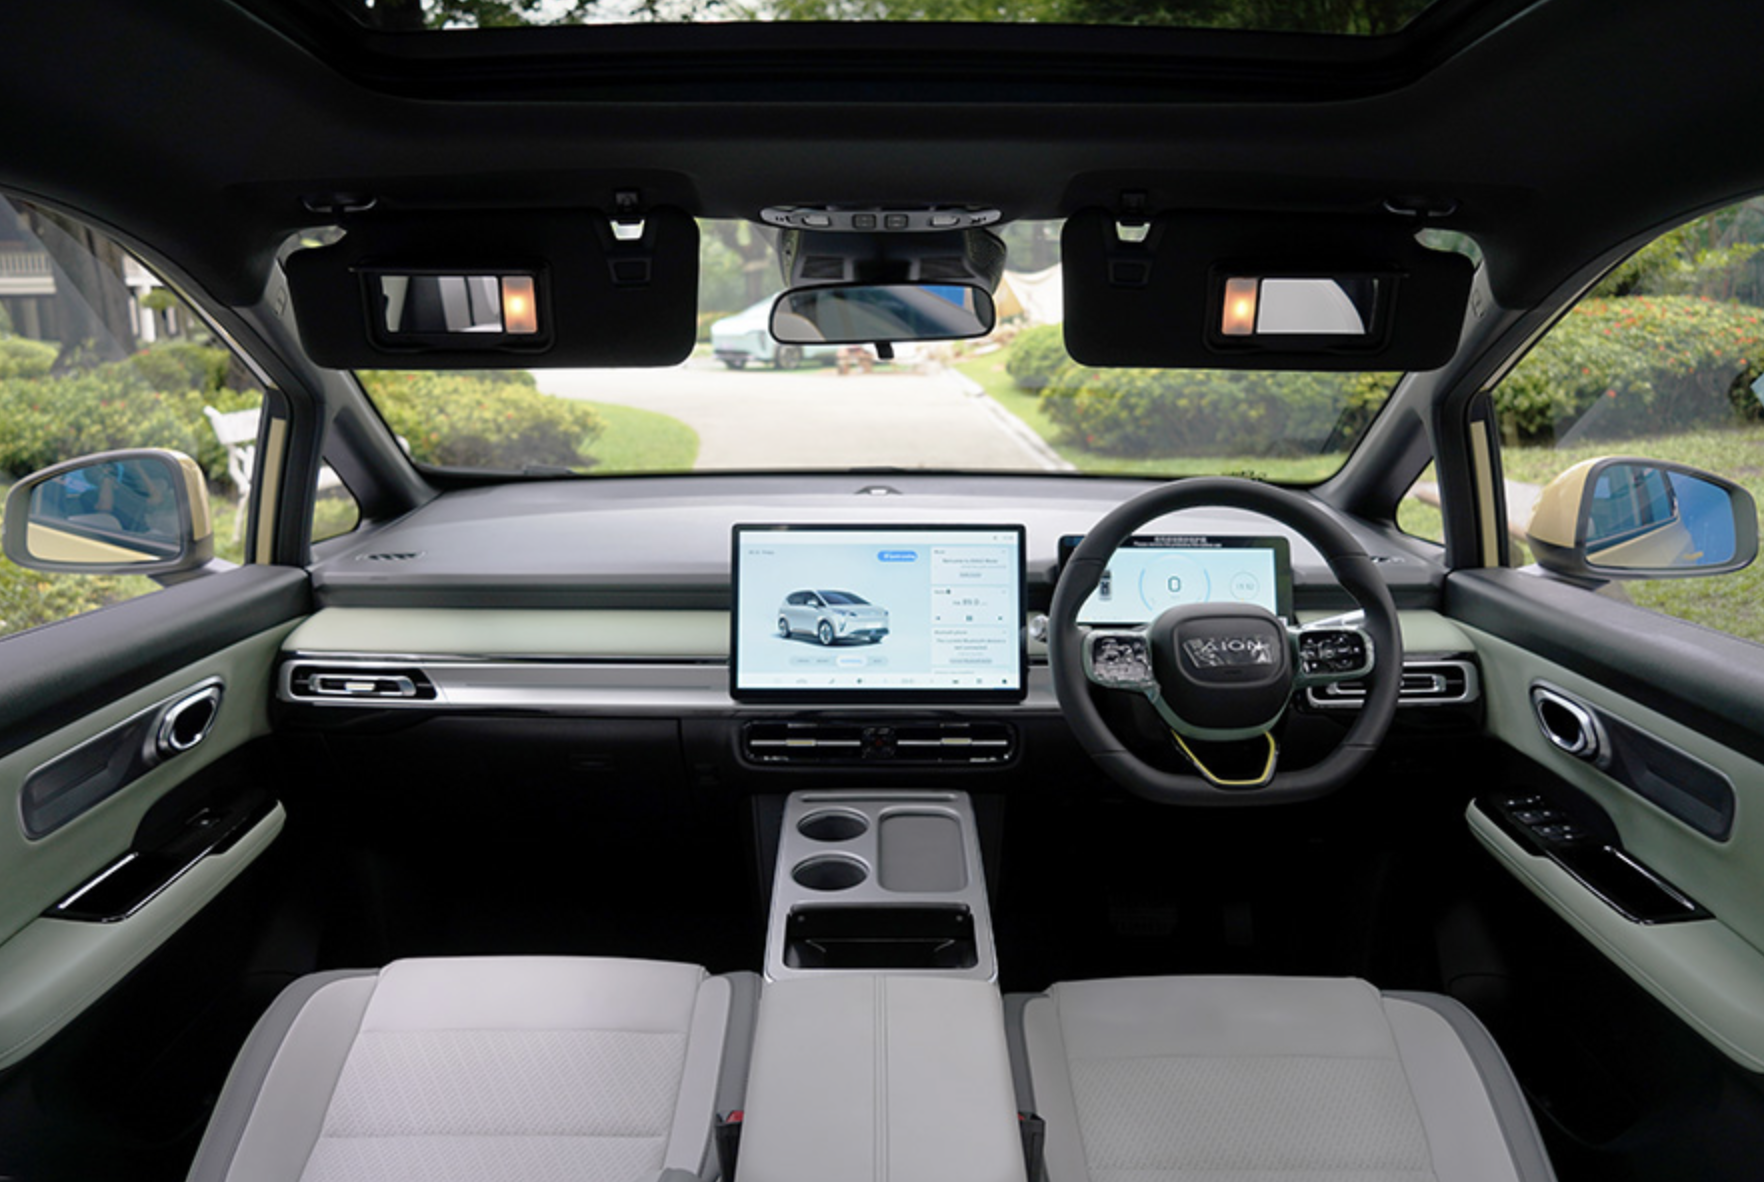 The Aion Y boasts a minimalist interior with a large multimedia screen and digital instruments. Photo: GAC